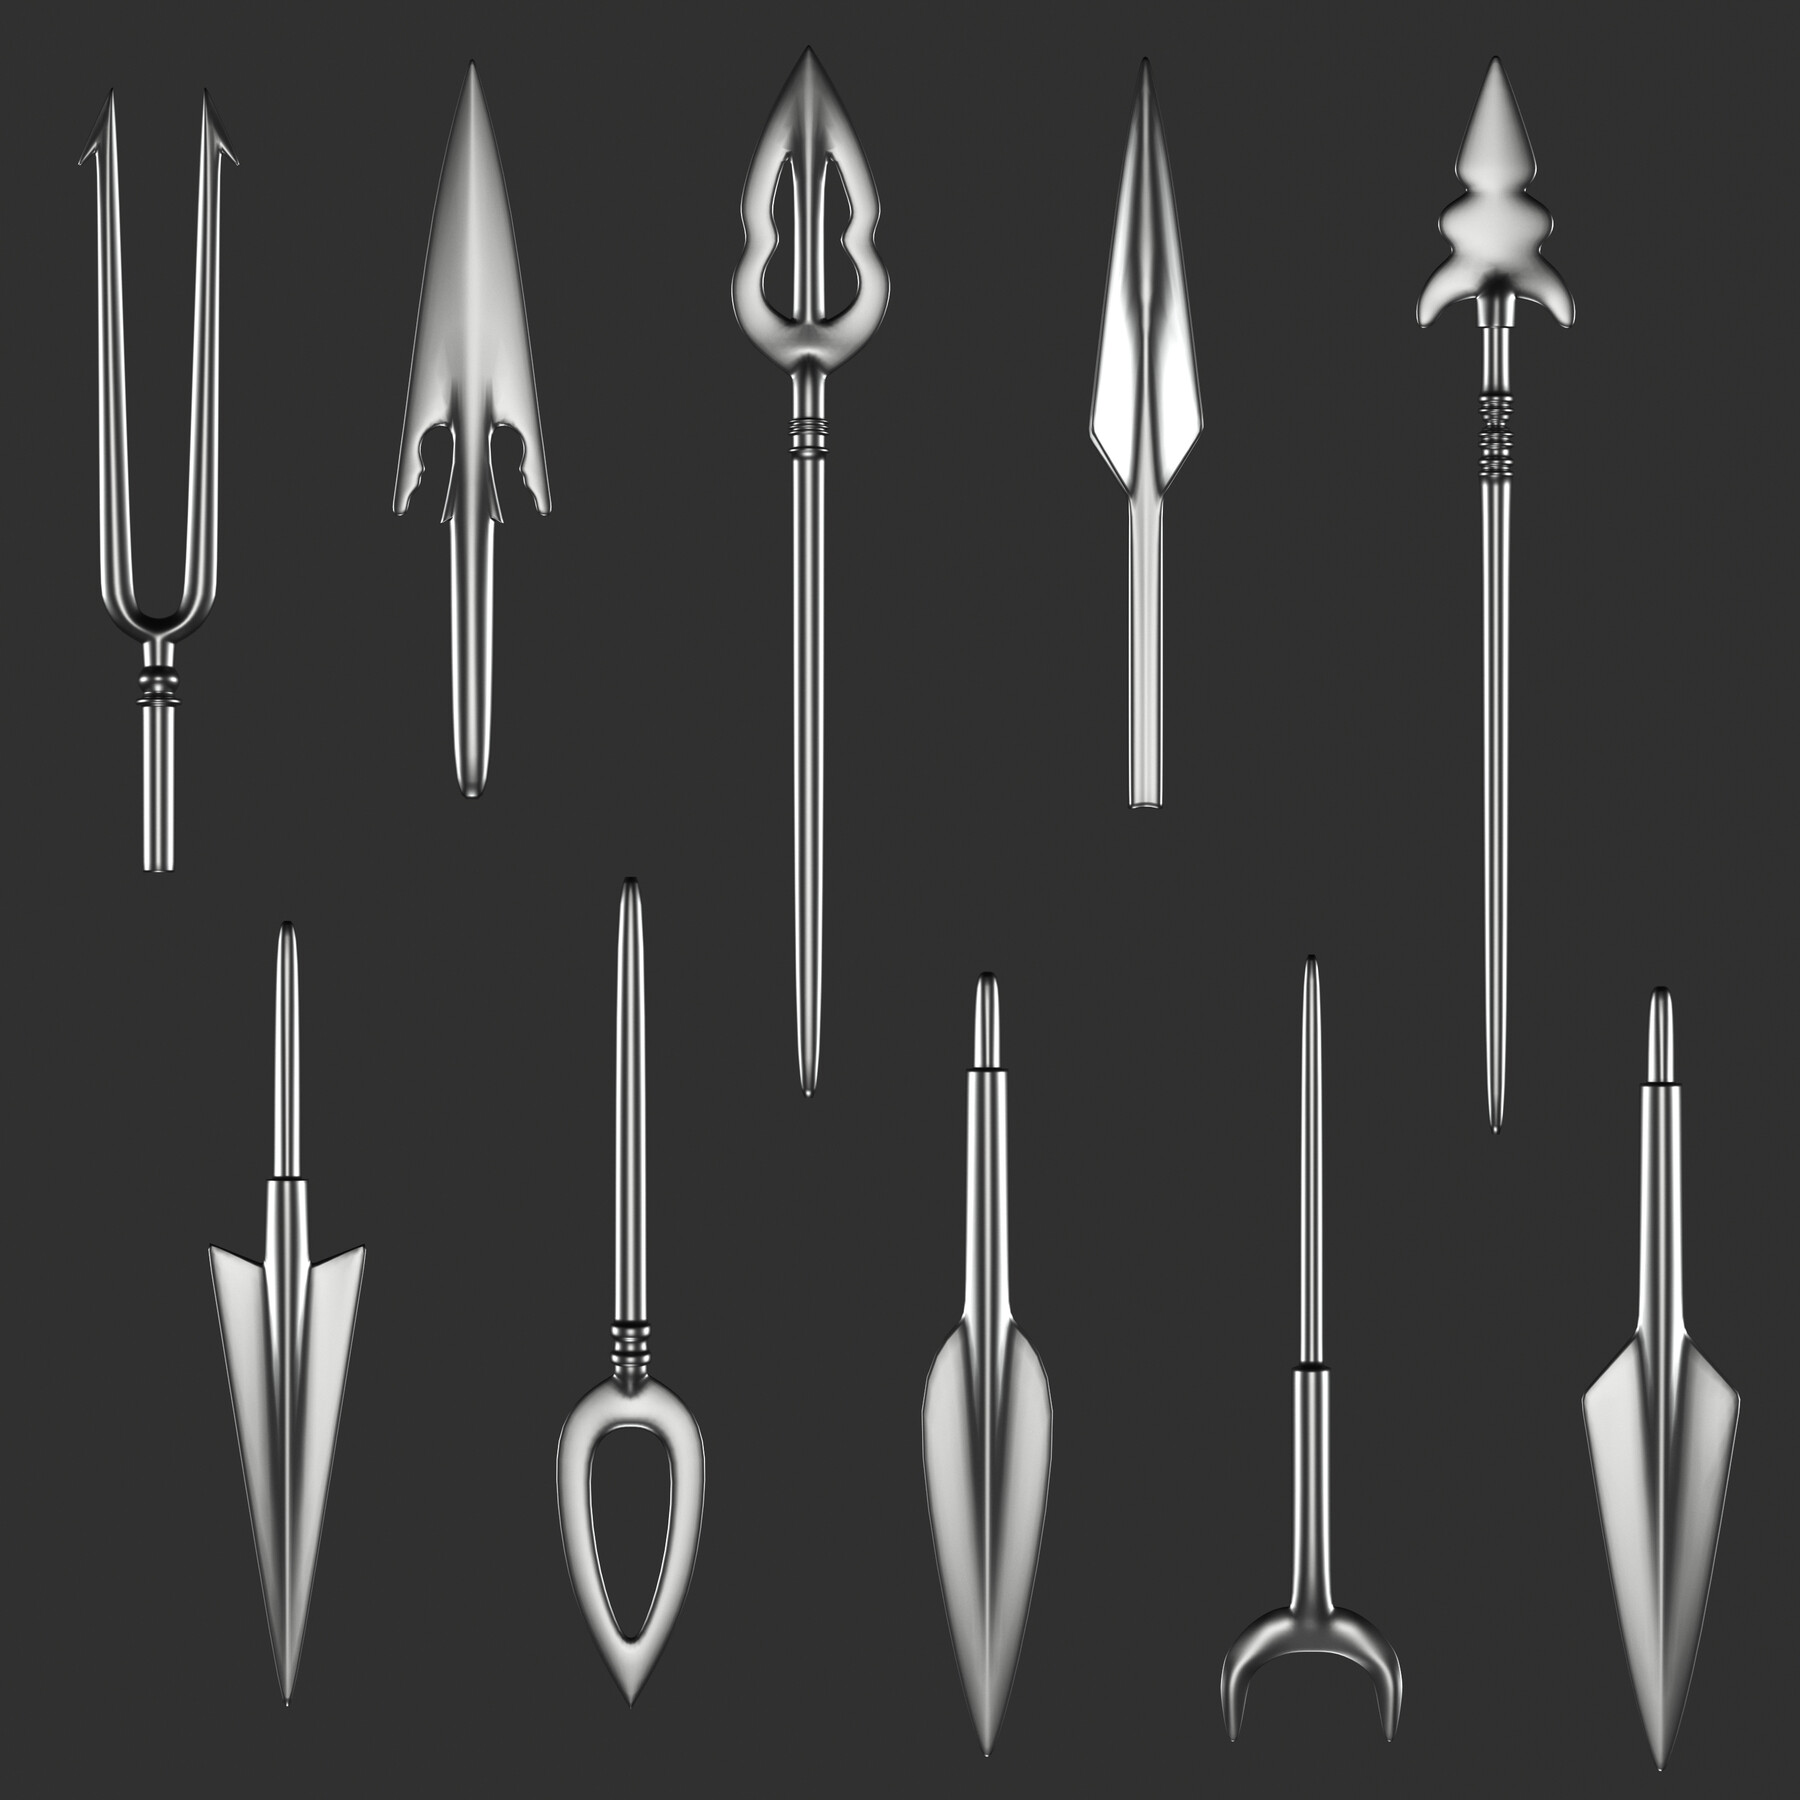 BRAM, hand forged spear lances, spears Weapons - Swords, Axes, Knives 